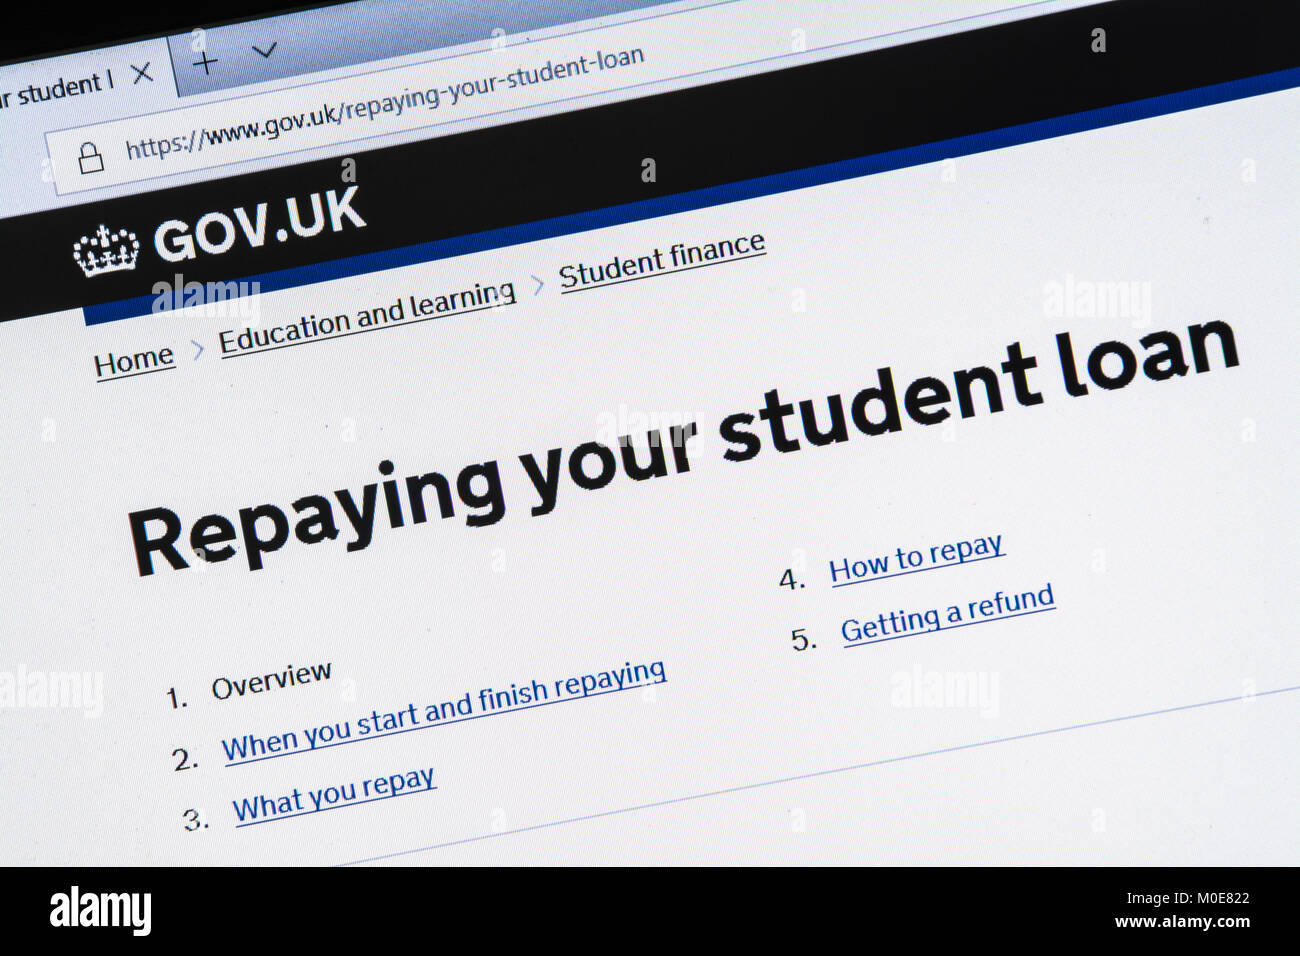 Computer screenshot of information about repaying your student loan on gov.uk website Stock Photo